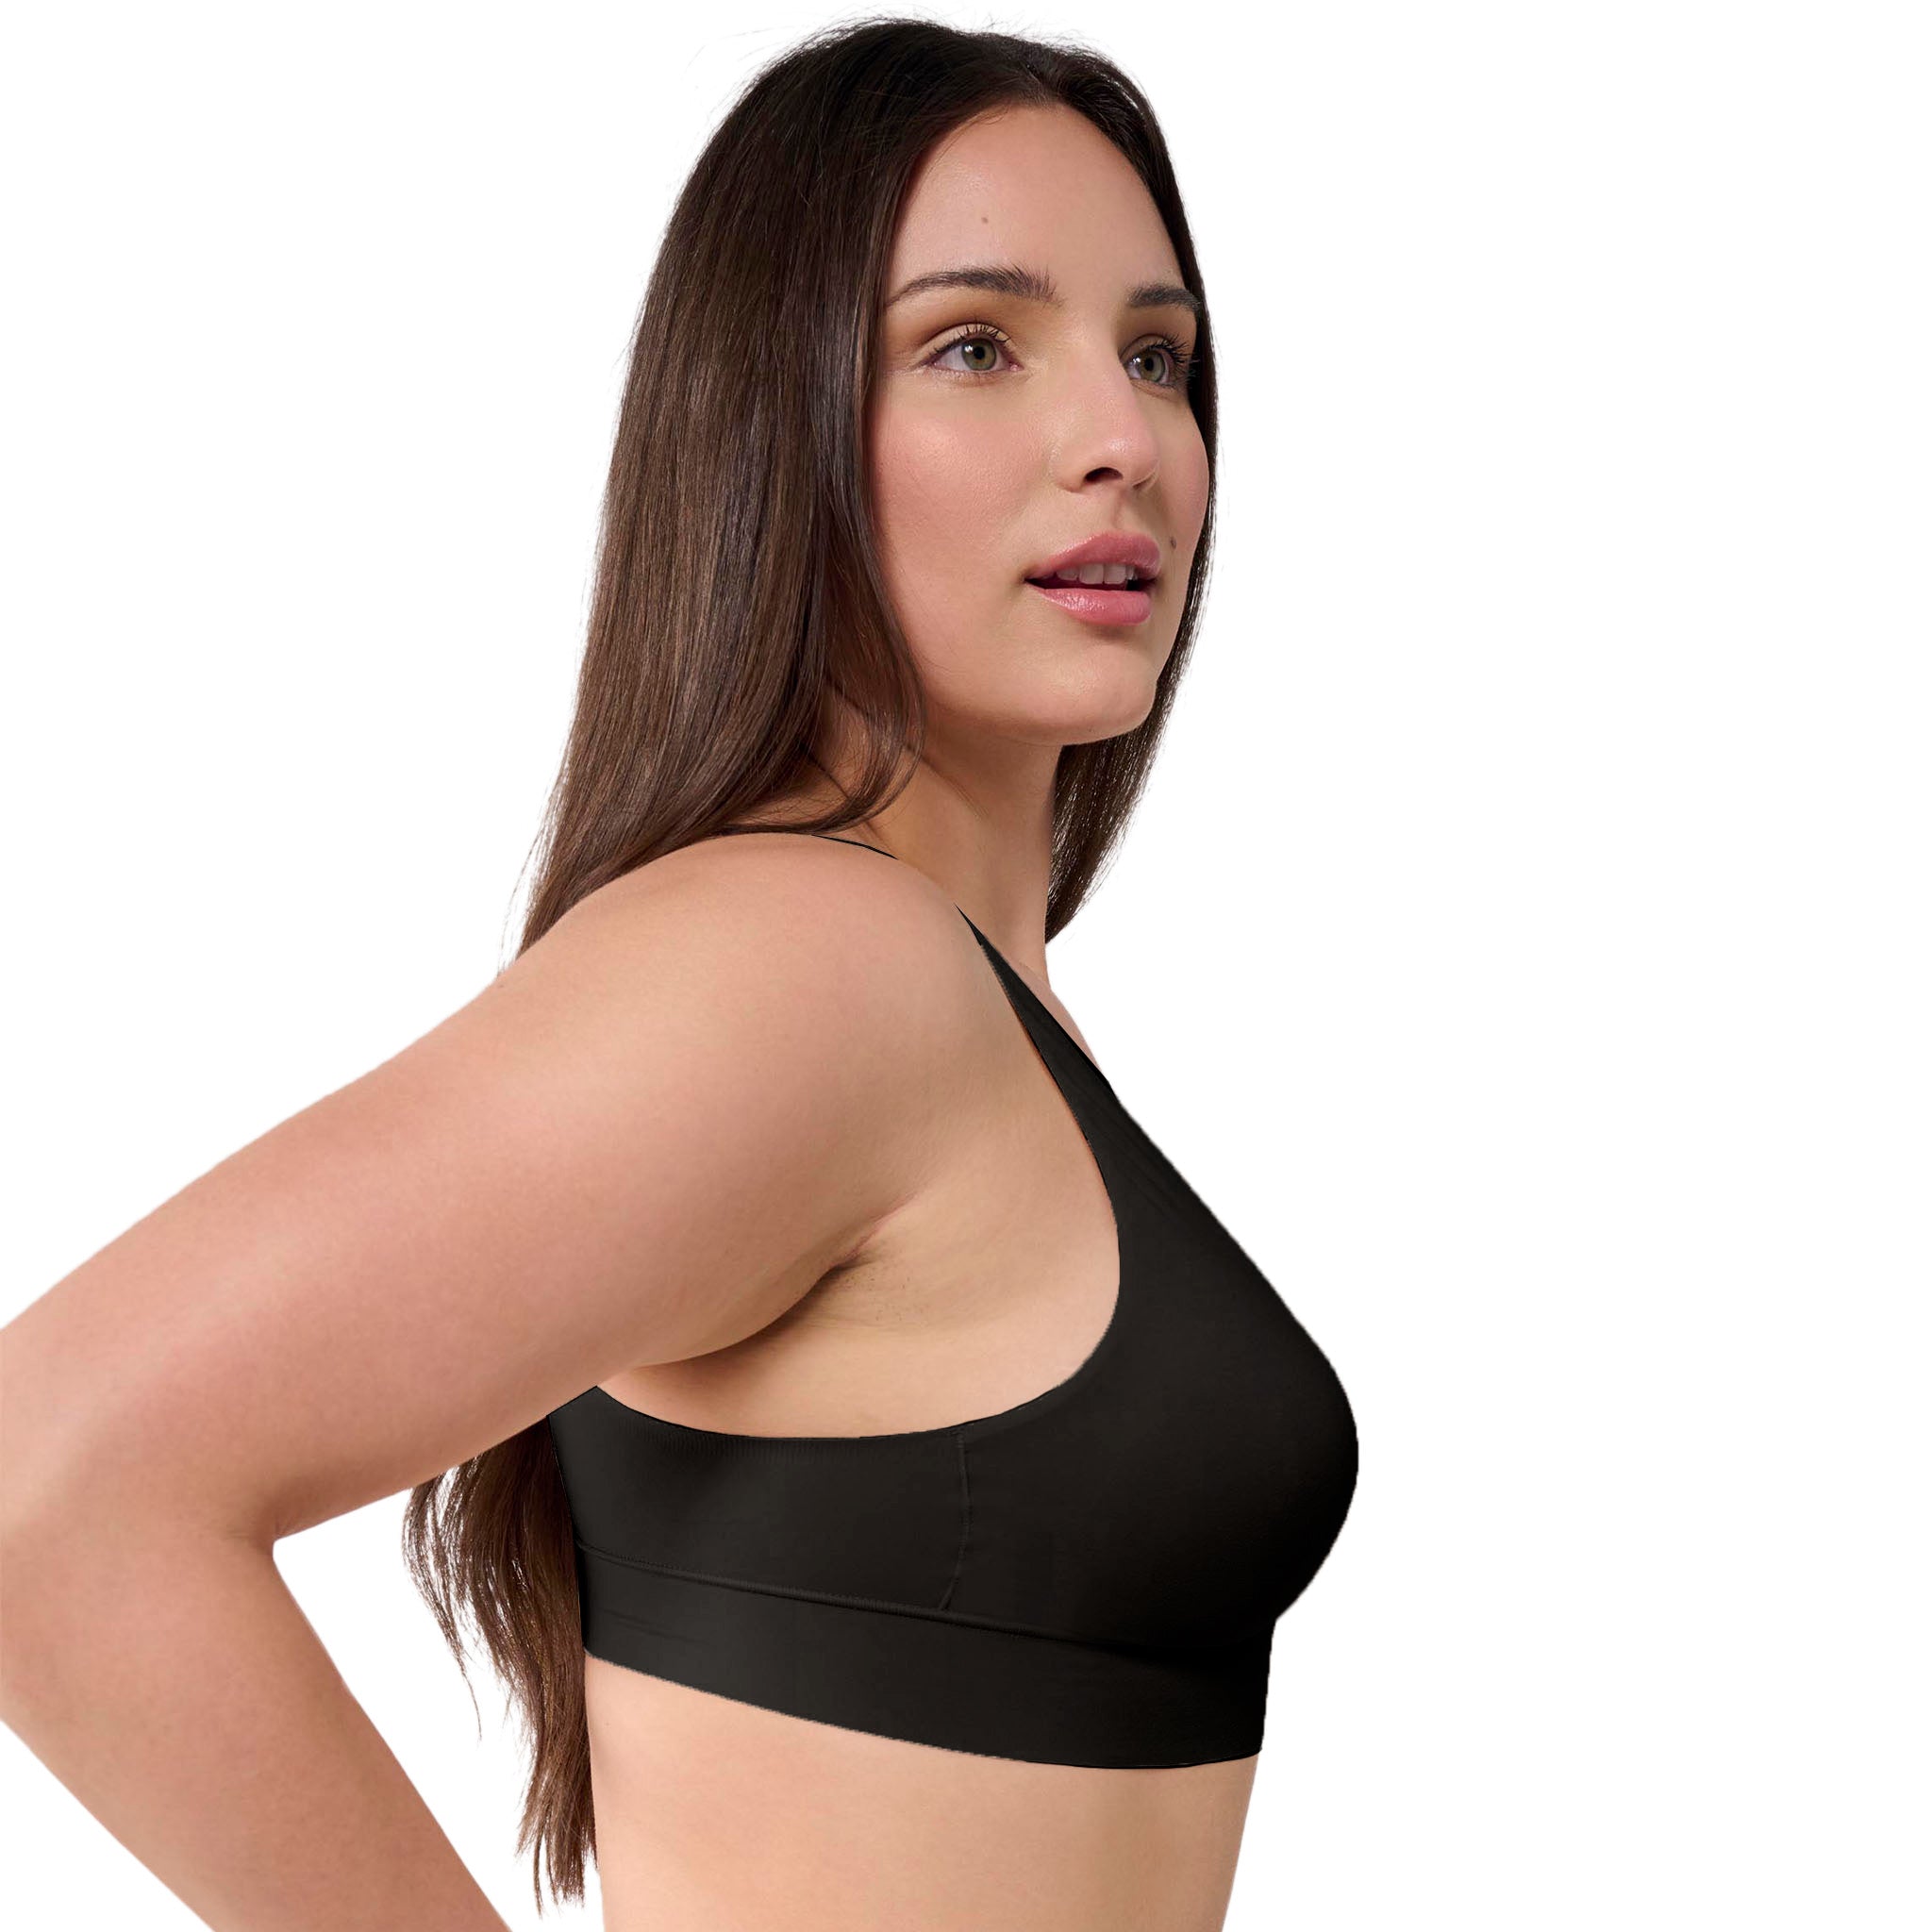 Floatley - Look no more! Slip into the Cozy Bra for the ultimate